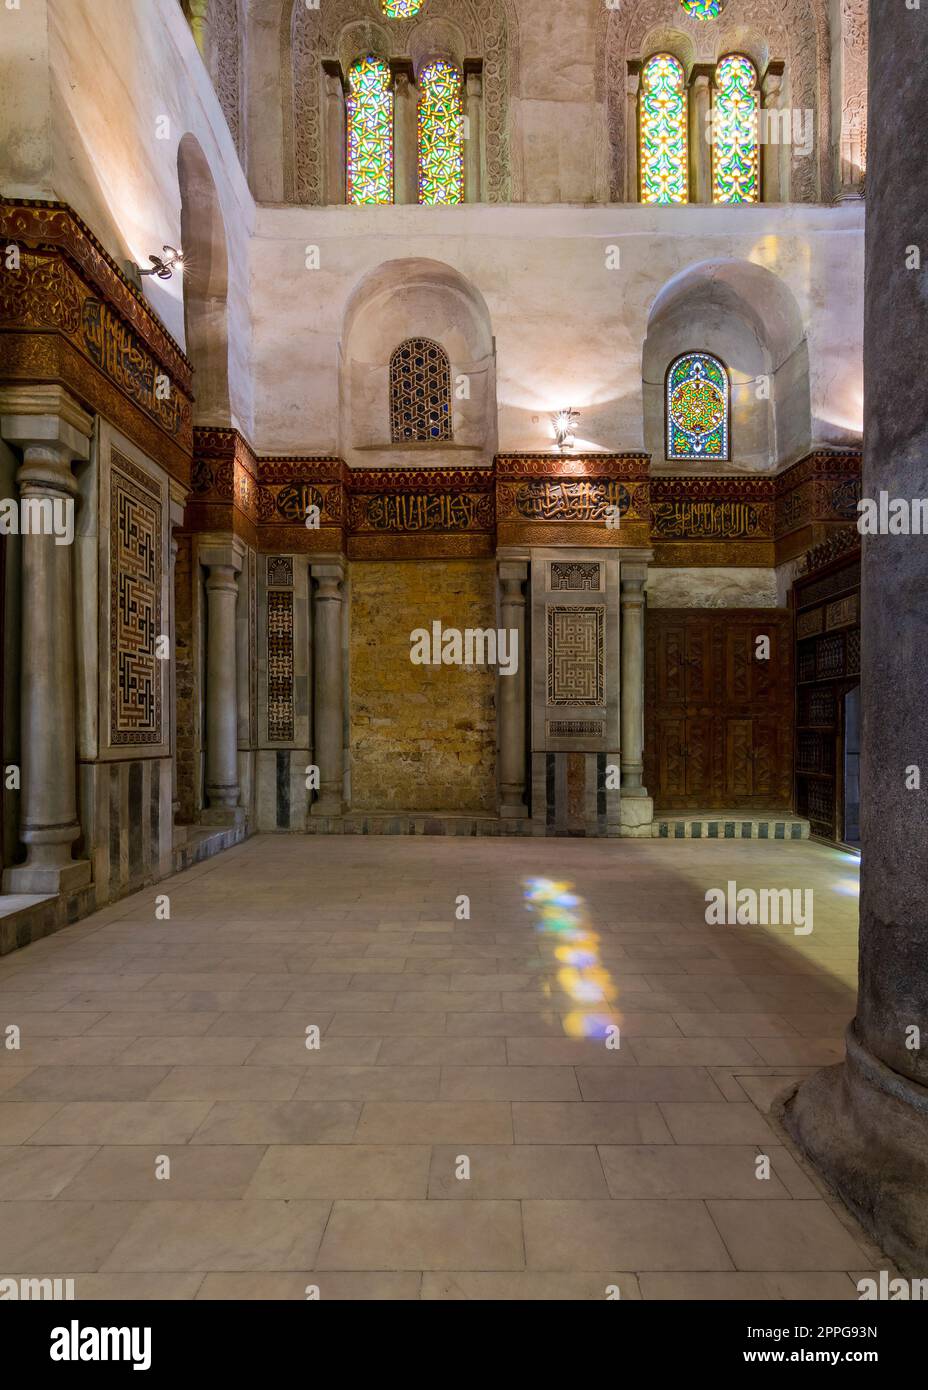 Interior view of the mausoleum of Sultan Qalawun, part of Sultan Qalawun Complex located in Al Moez Street, Cairo, Egypt Stock Photo